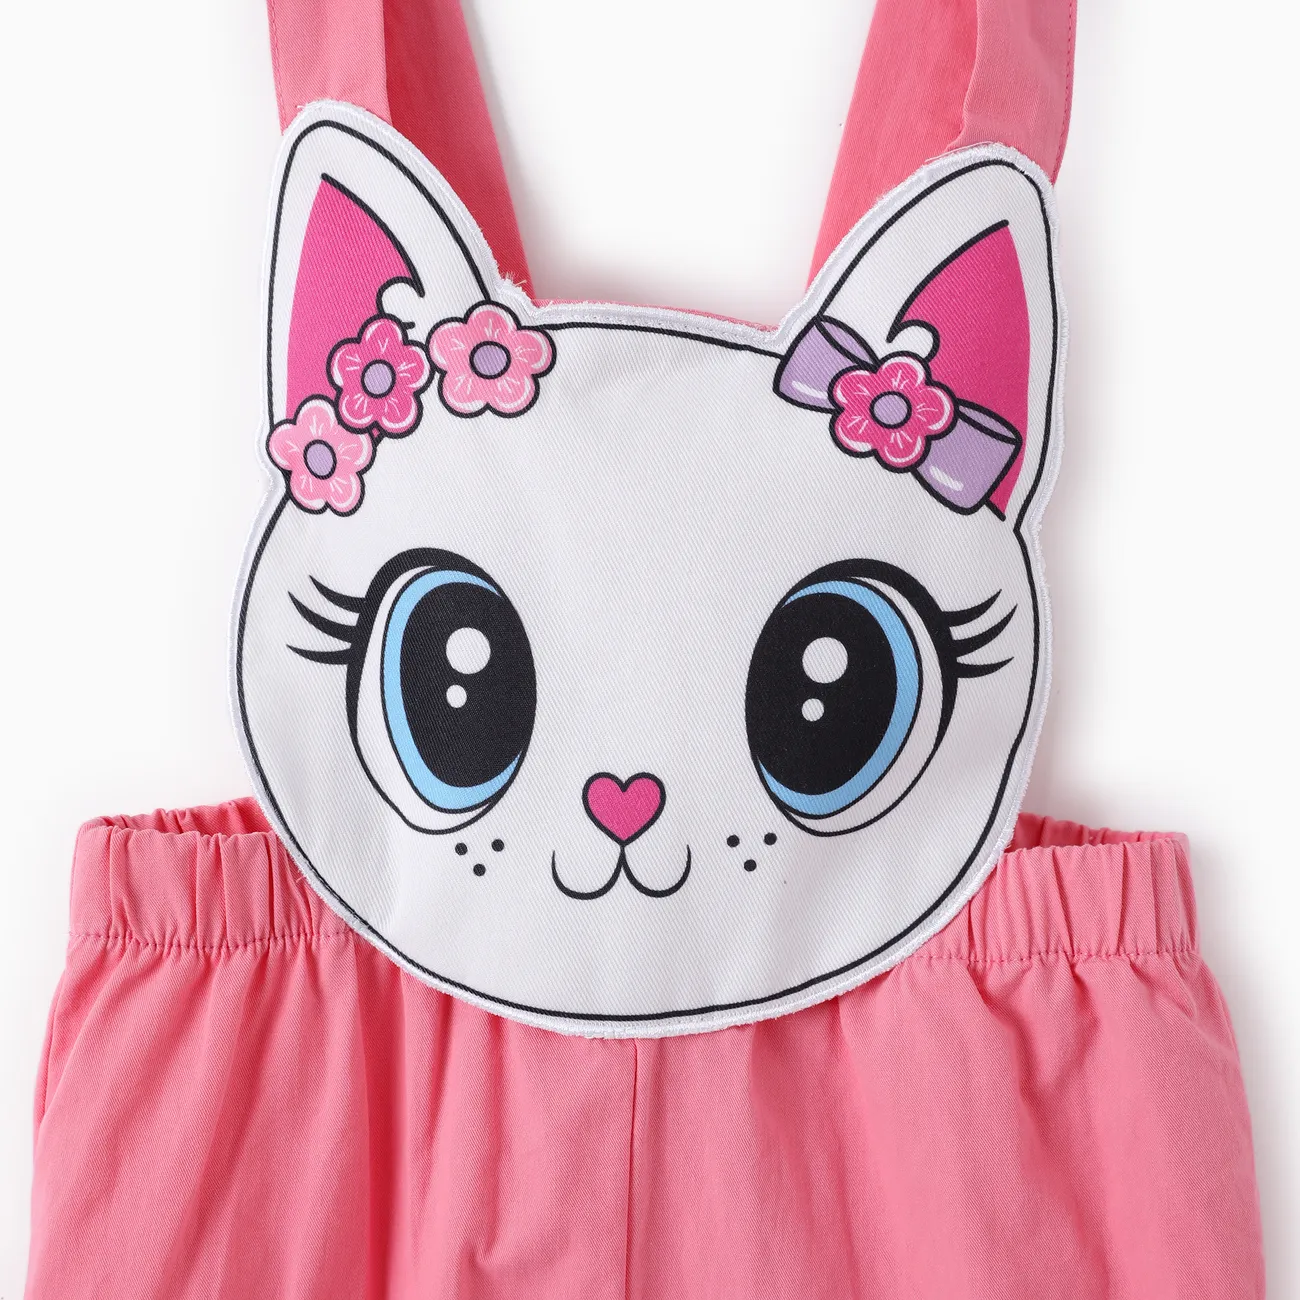 Toddler Girl 2pcs Floral Print Tee and Cat Embroidery Overalls Set PINK-1 big image 1